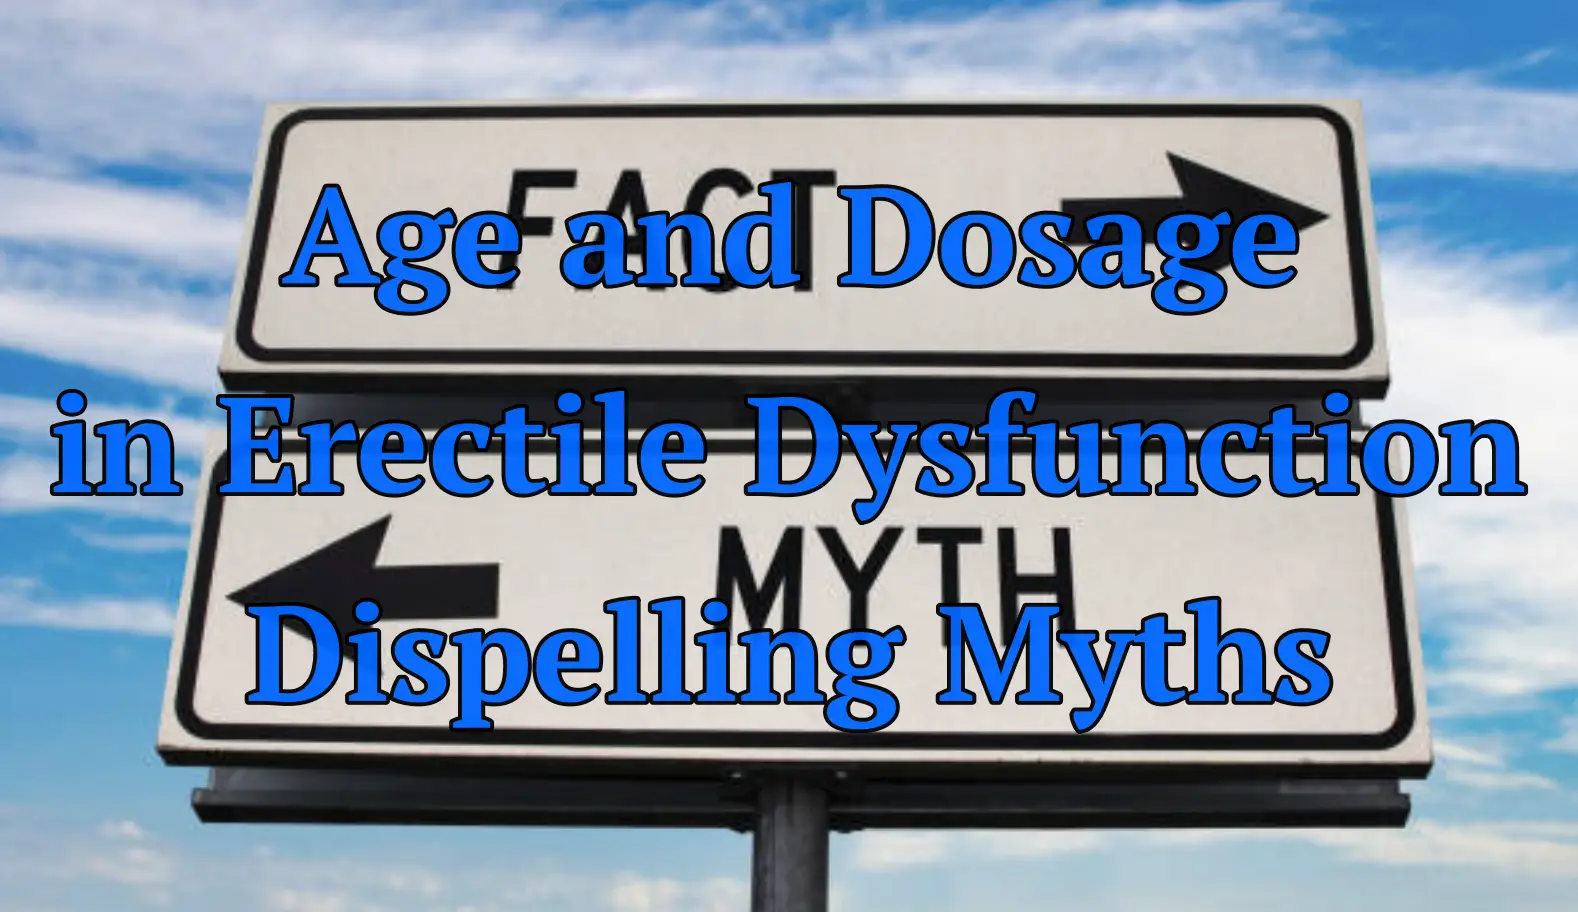 Age and Dosage in Erectile Dysfunction - Dispelling Myths